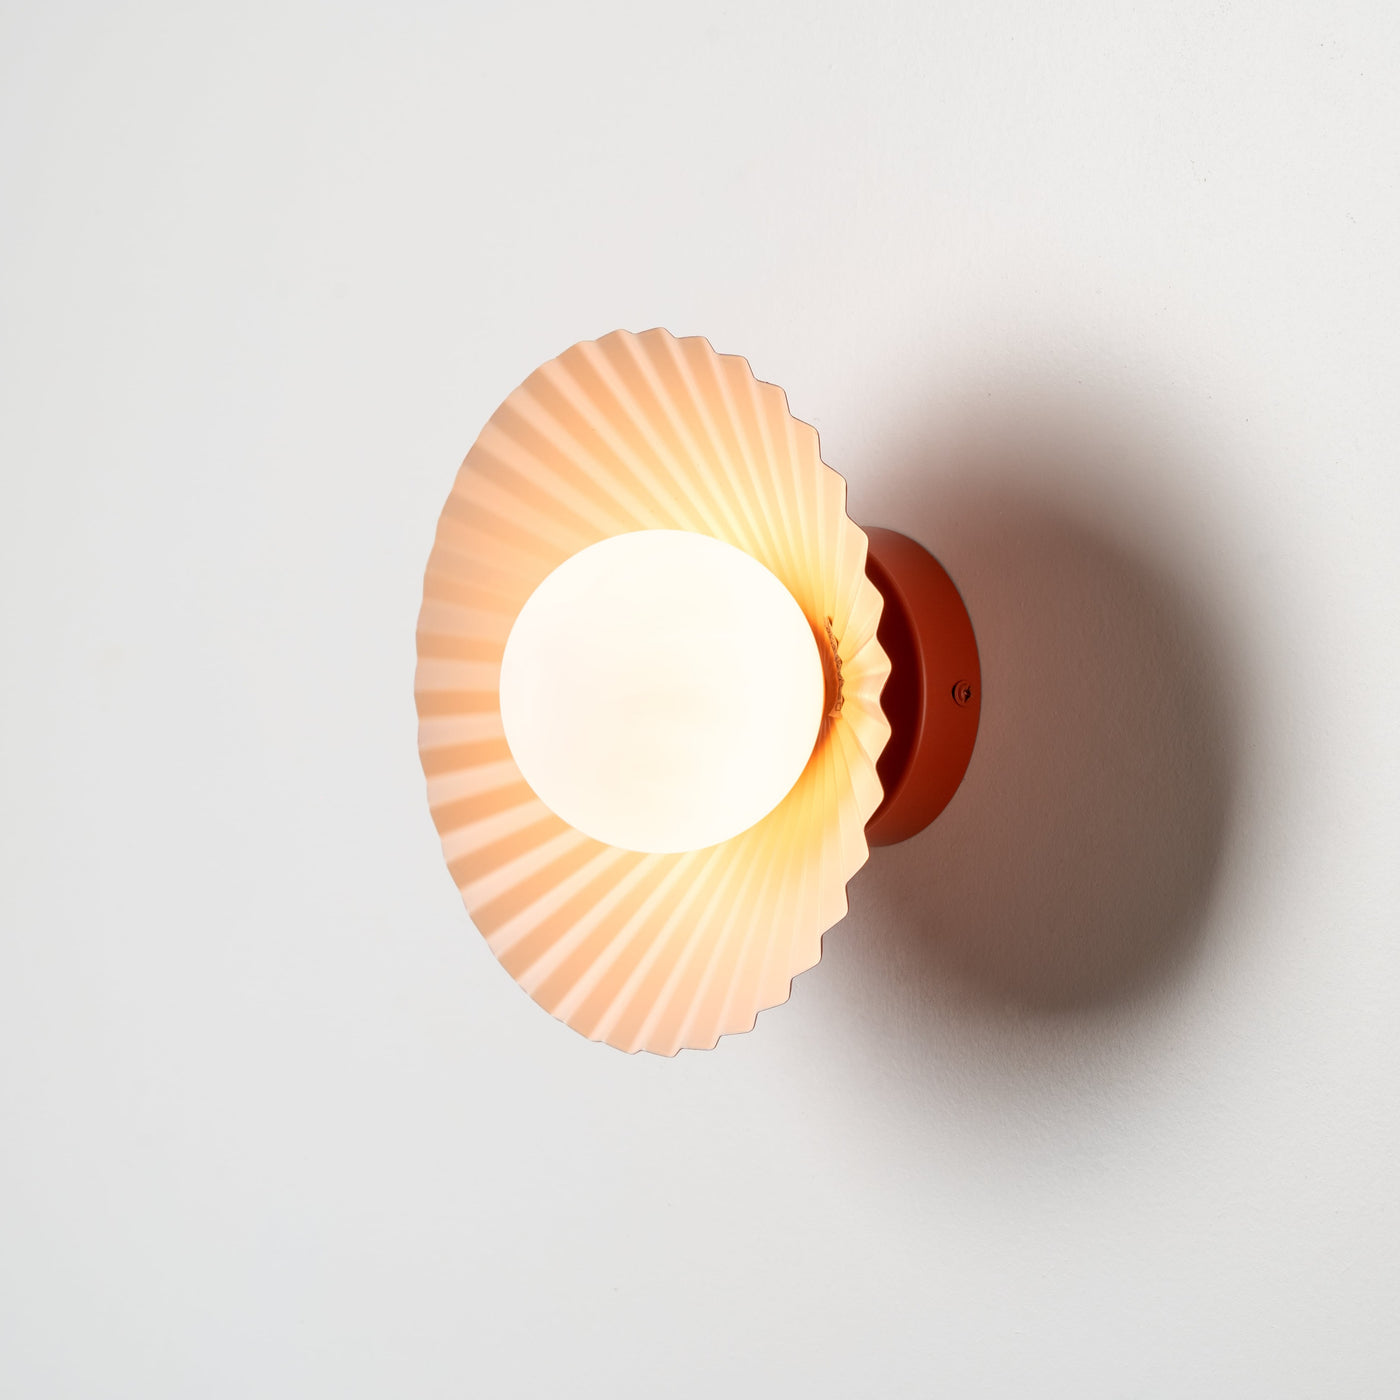 Houseof Pleat Wall and Flush Ceiling Lamp designed by Emma Gurner, light on. Available from someday designs.